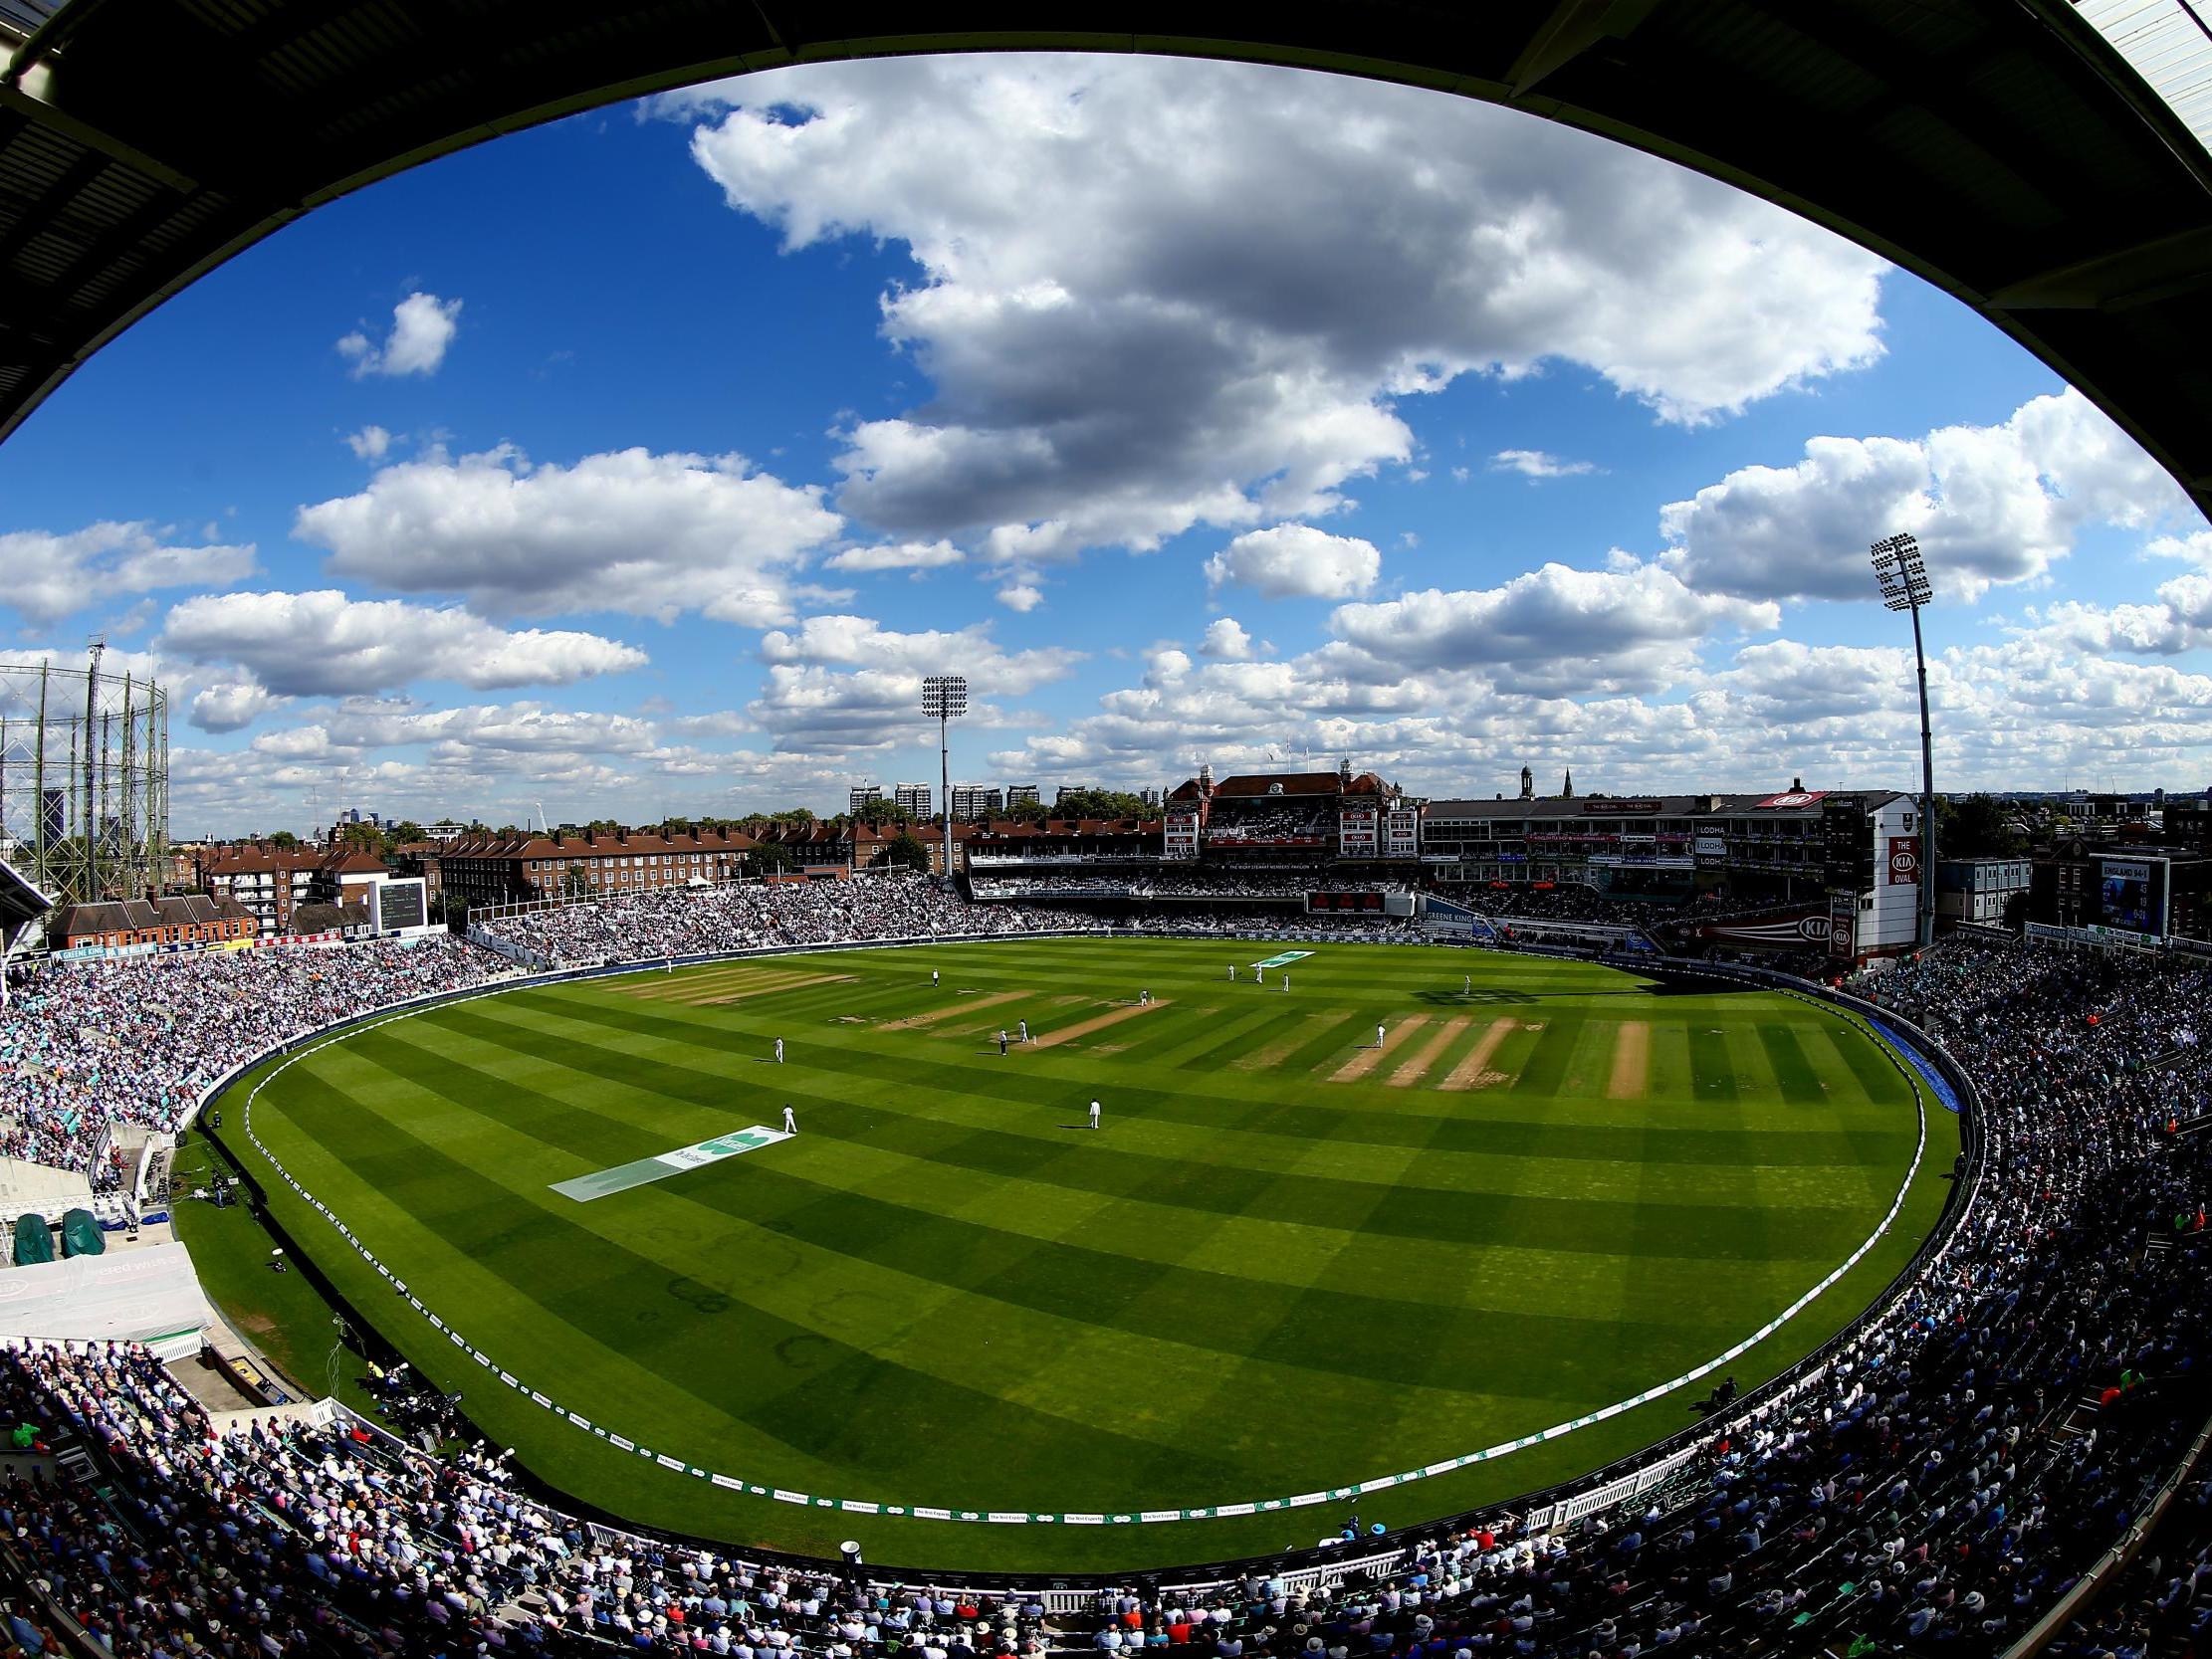 Graves threatened to strip The Oval of its hosting rights